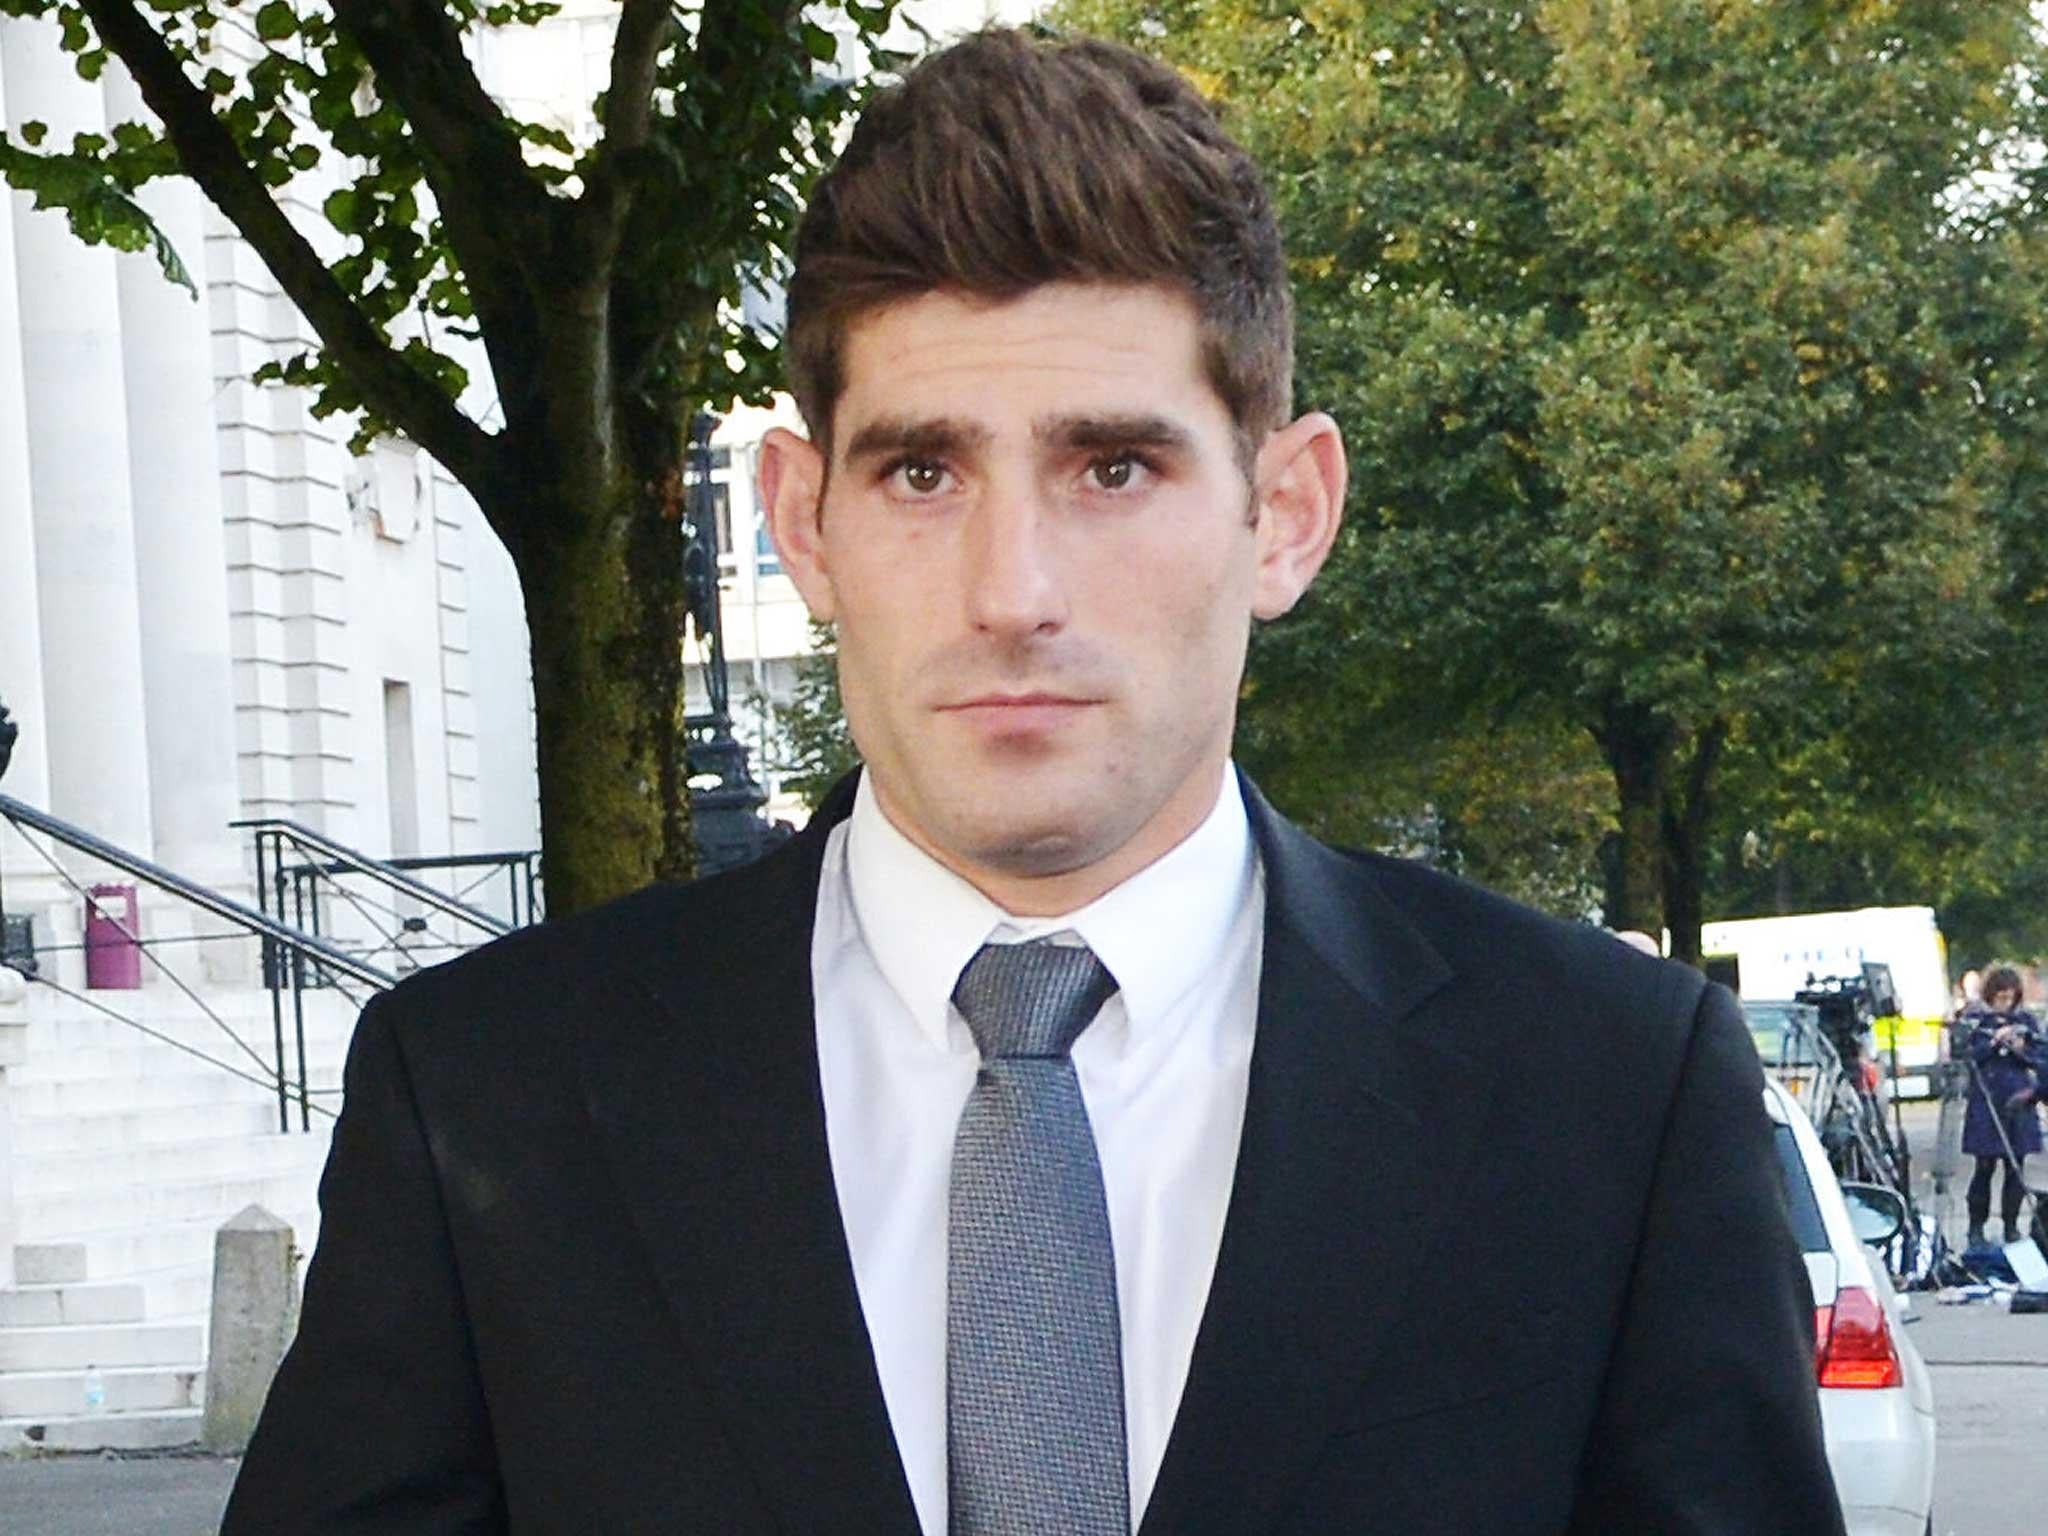 Ched Evans has offered advice to women on the dangers they face while under the influence of alcohol